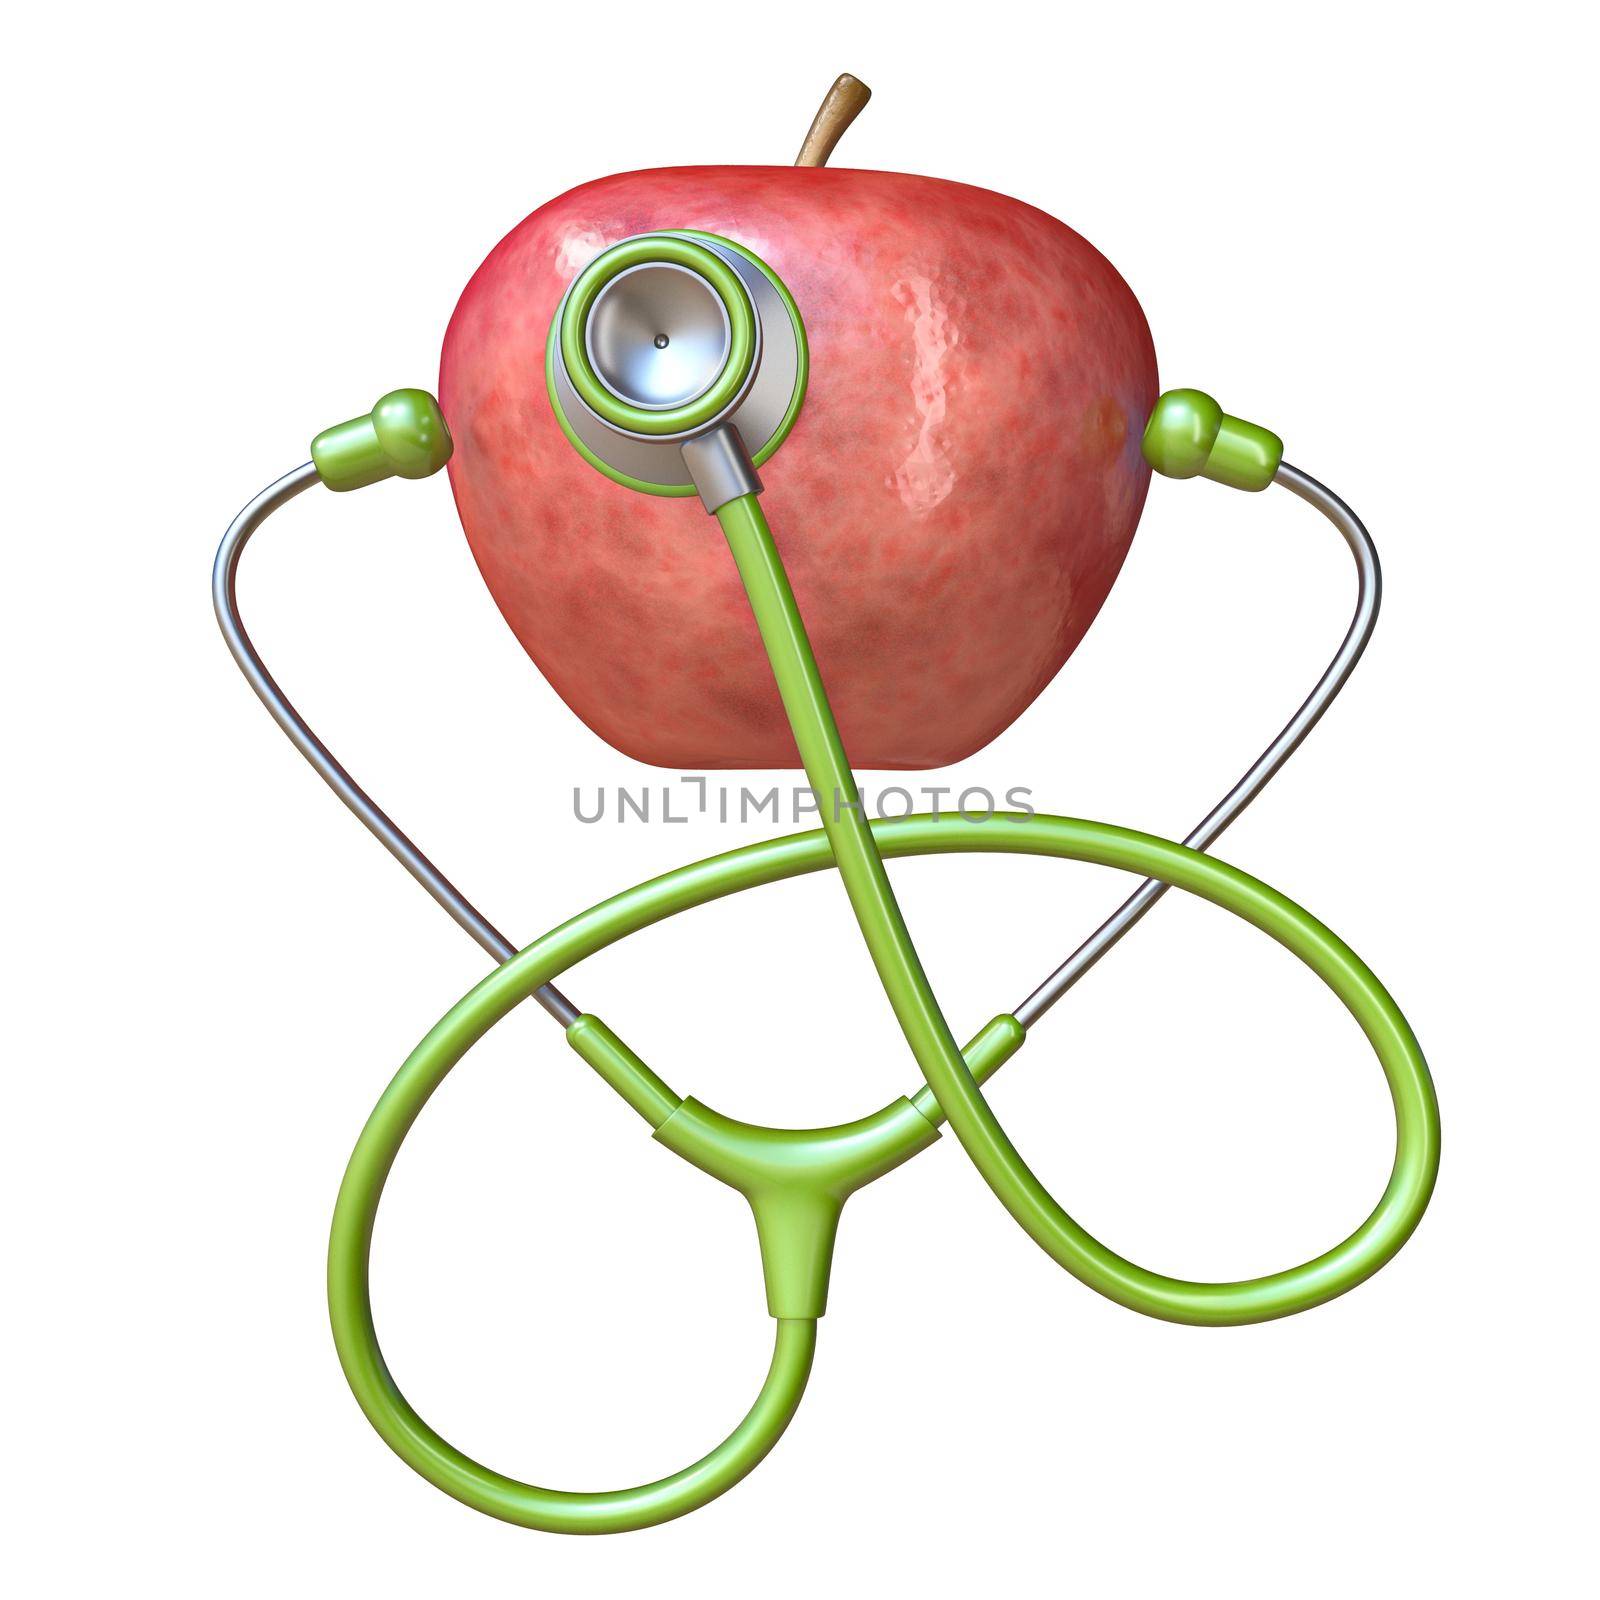 Stethoscope and red apple 3D render illustration isolated on white background